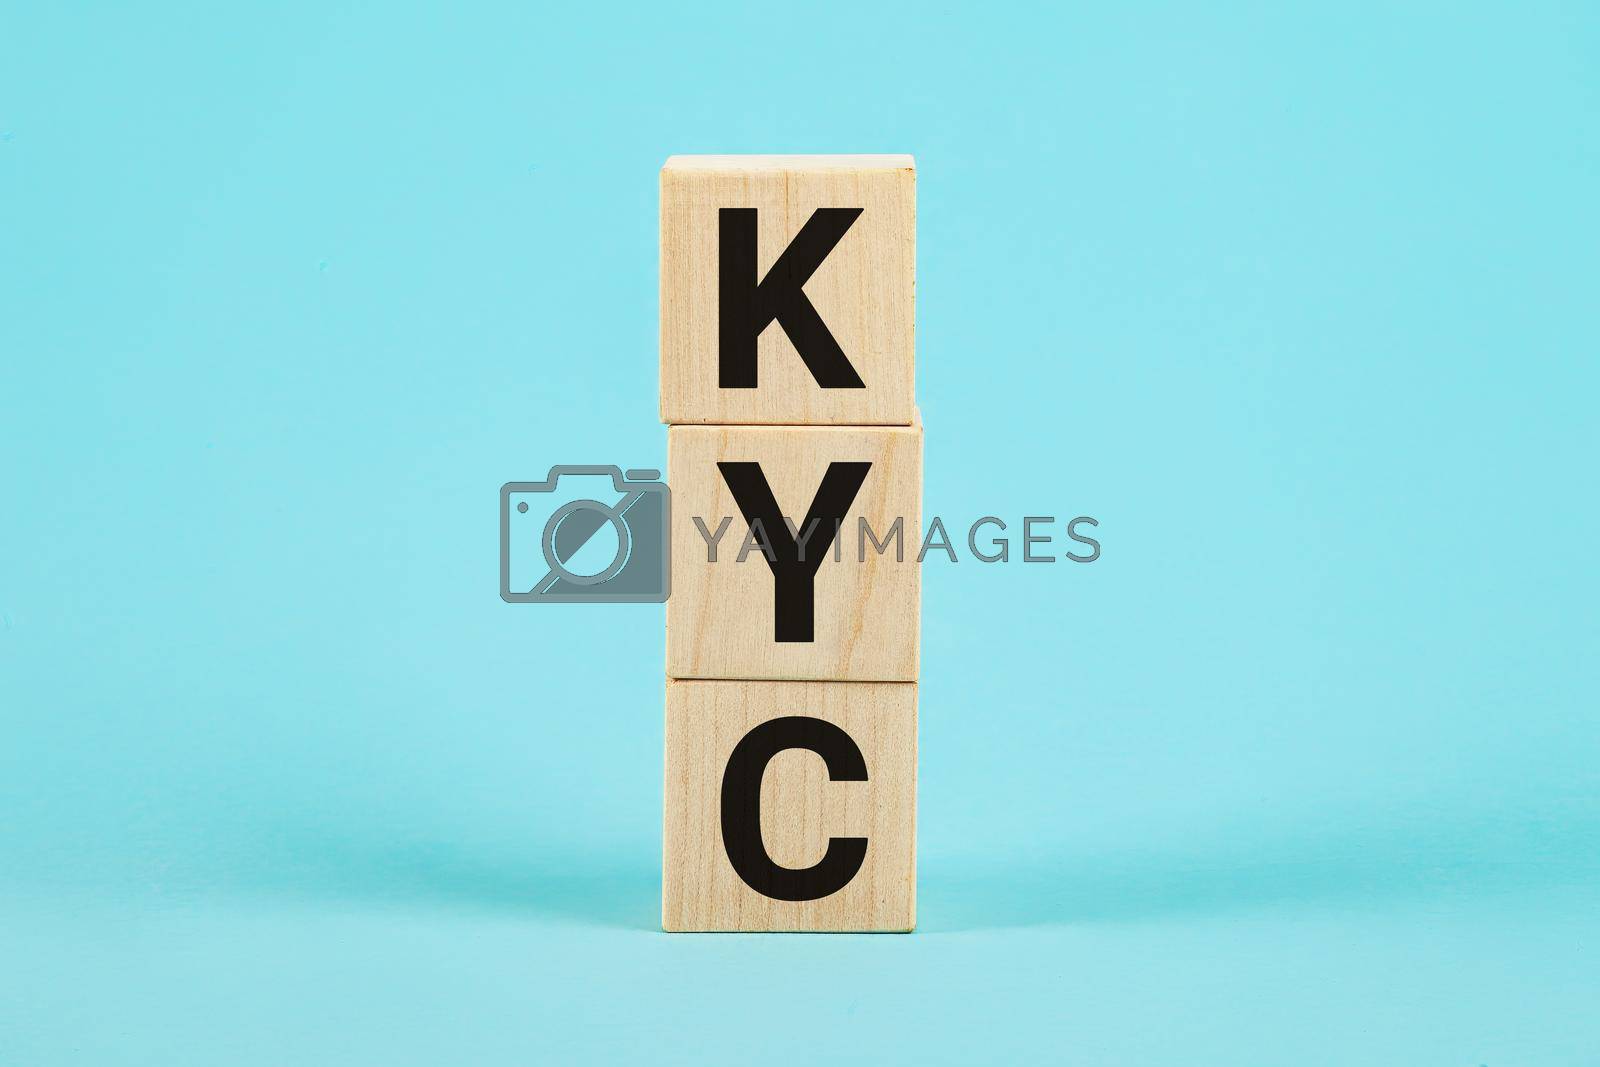 Royalty free image of KYC - Know Your Customer. Wooden blocks with text KYC. You can use in business, finance , marketing and other concepts. Business photo showcasing Marketing creating a poll improve product or brand by ViShark